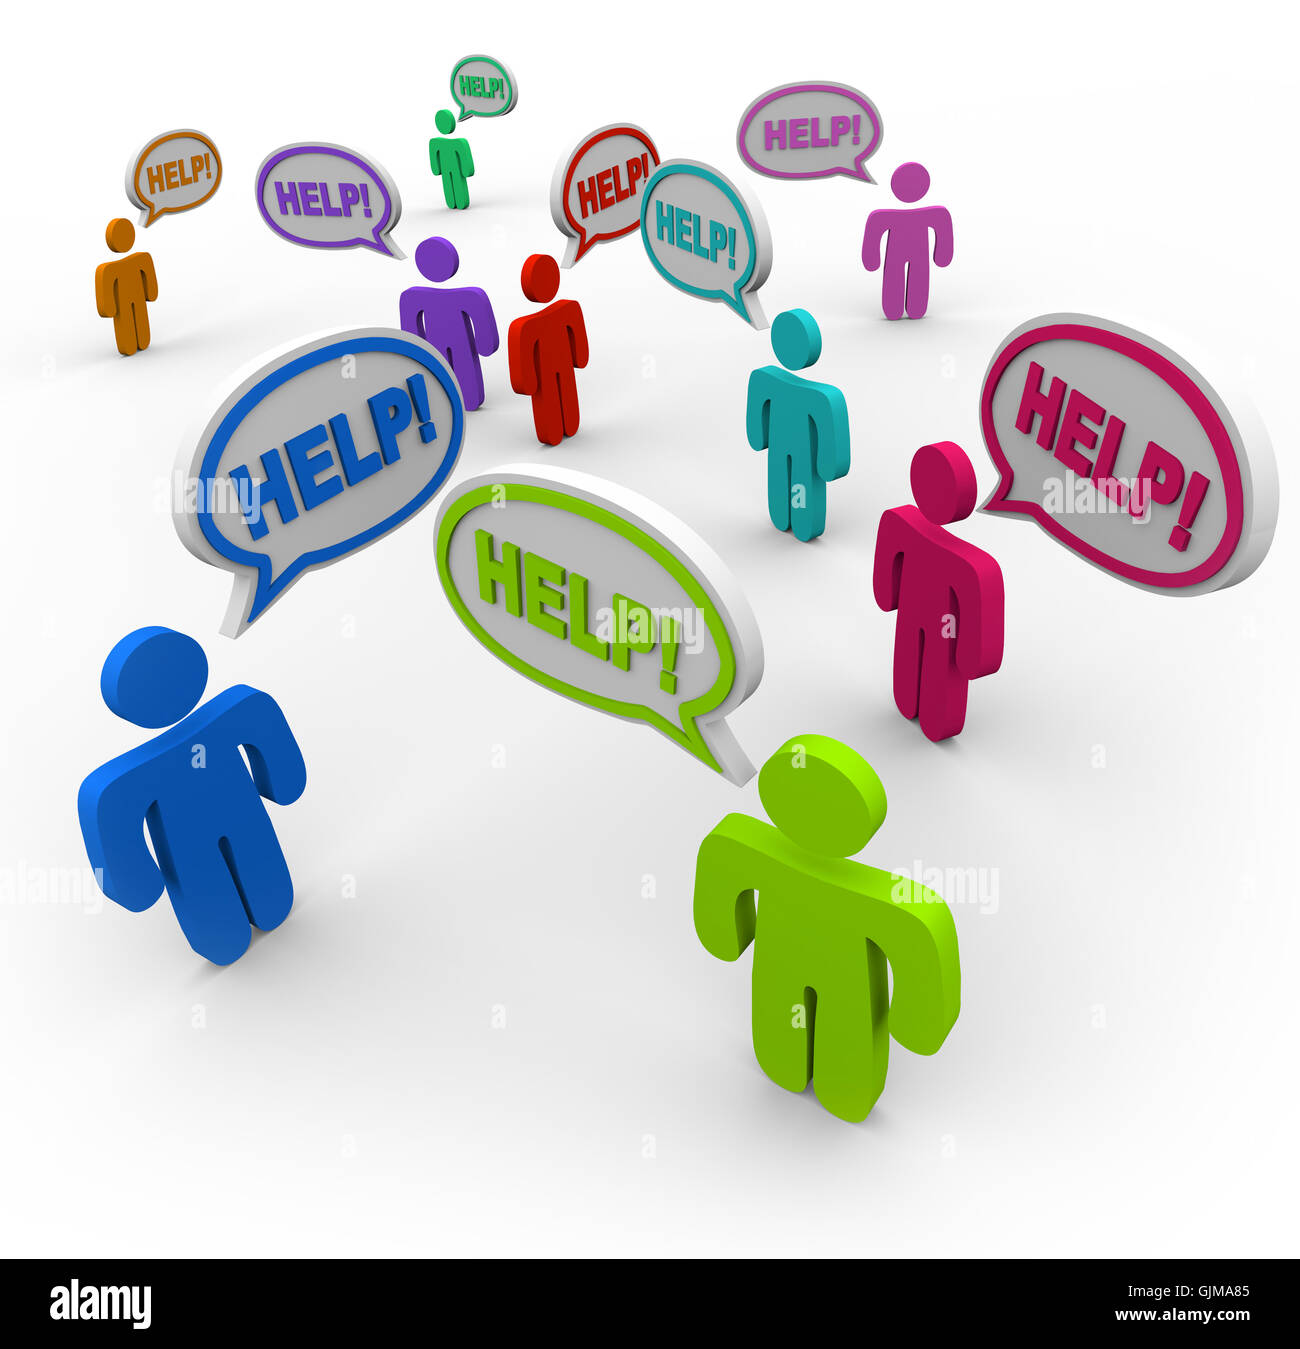 People Asking for Help in Speech Bubbles Stock Photo